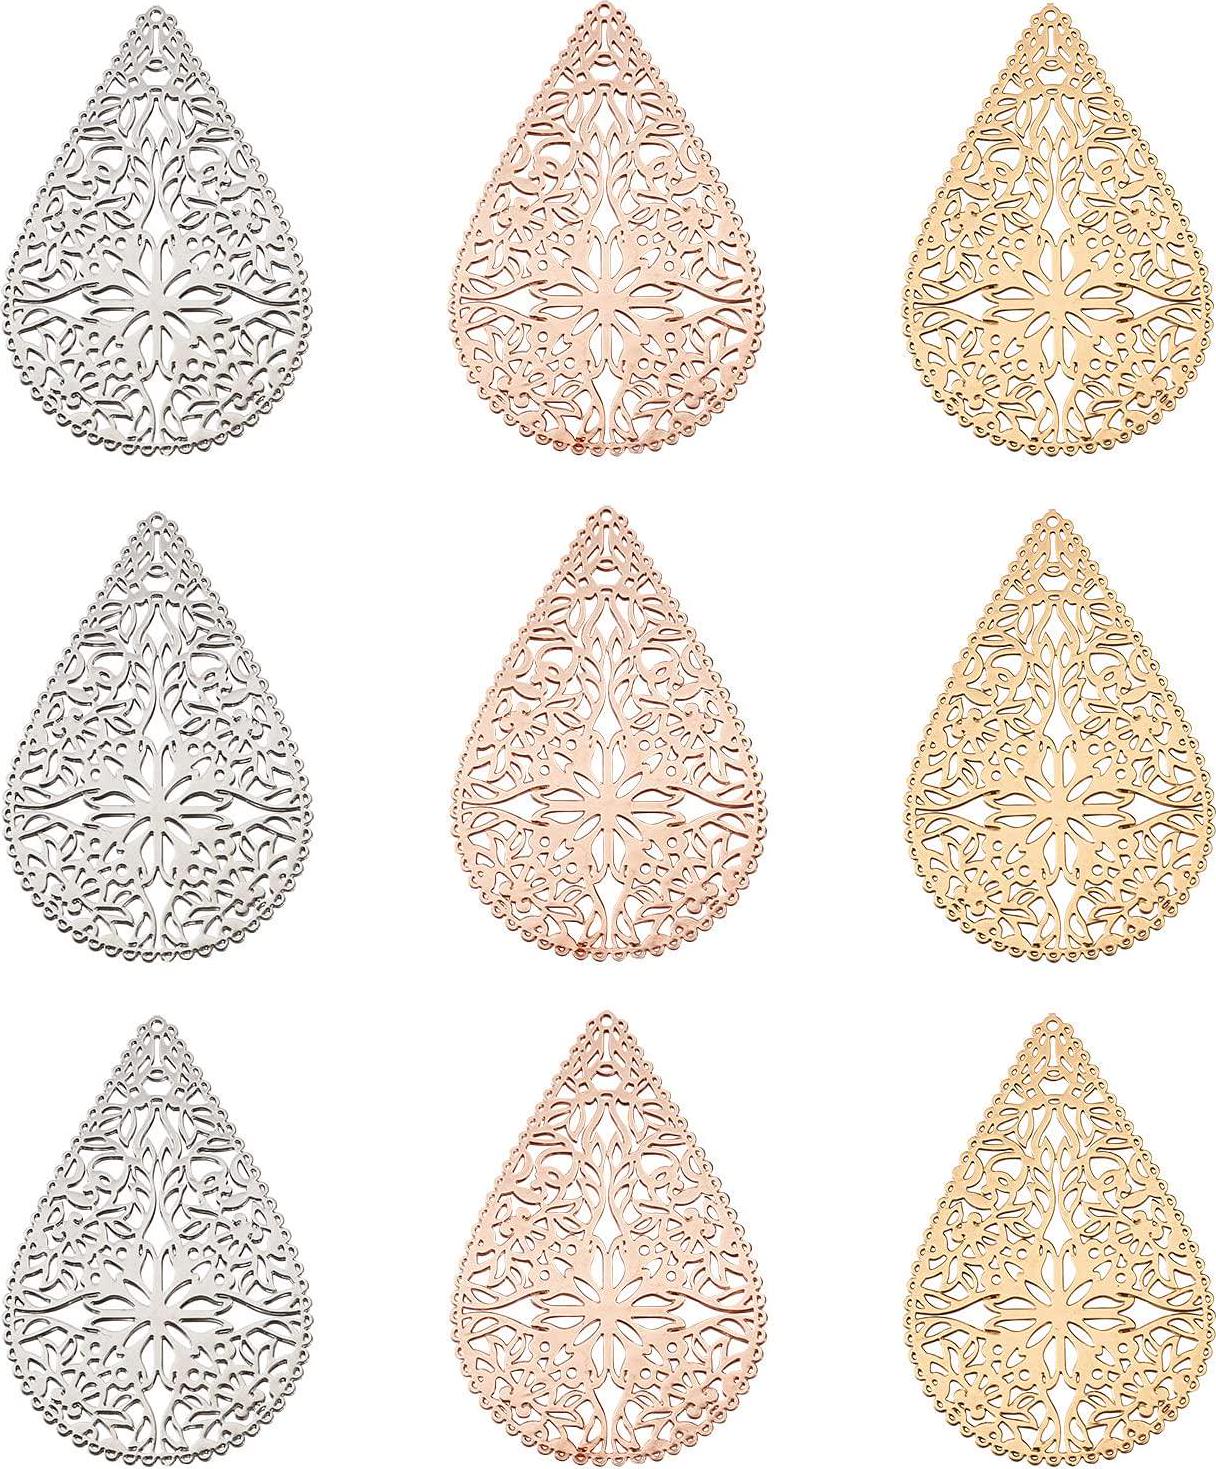 FASHEWELRY, FASHEWELRY 45Pcs Brass Teardrop Filigree Connector Charms 3 Colors Filigree Joiners Links Etched Metal Embellishments for DIY Earring Necklace Jewelry Making